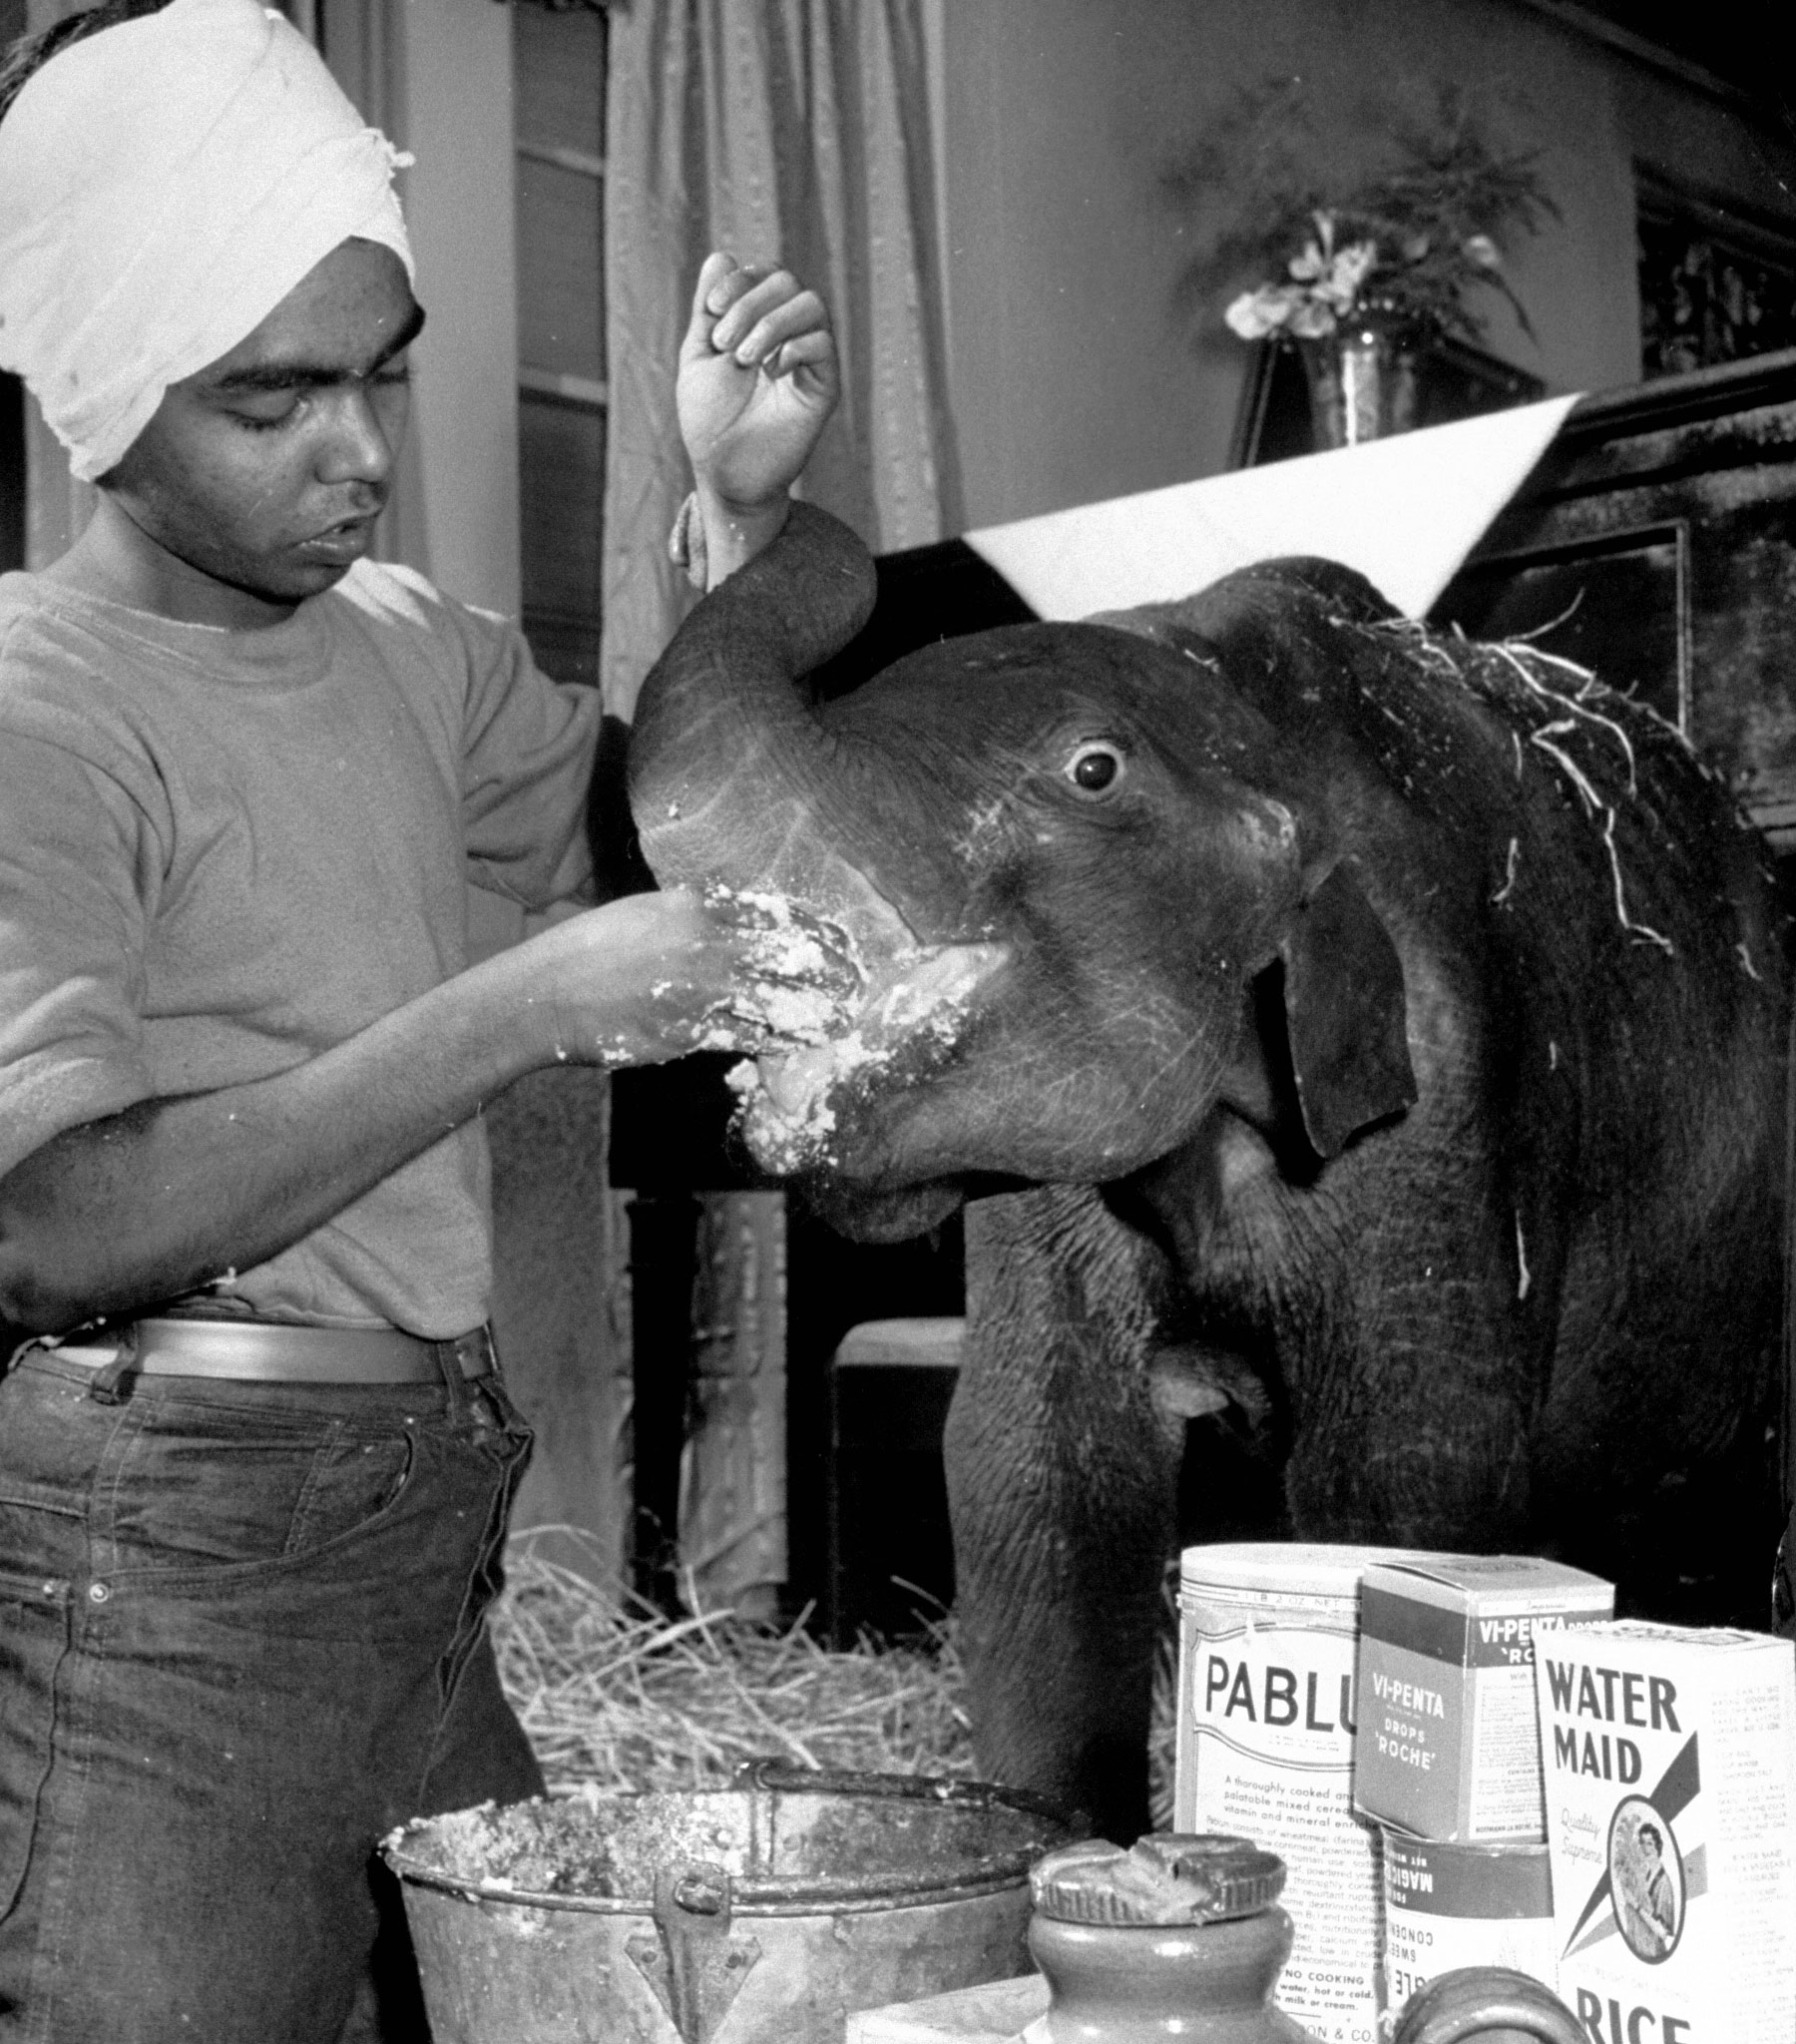 "Butch", baby female Indian elephant in the Dailey Circus, being fed by keeper Singh. Butch eats mixture of pablu, condensed milk and vitamins.